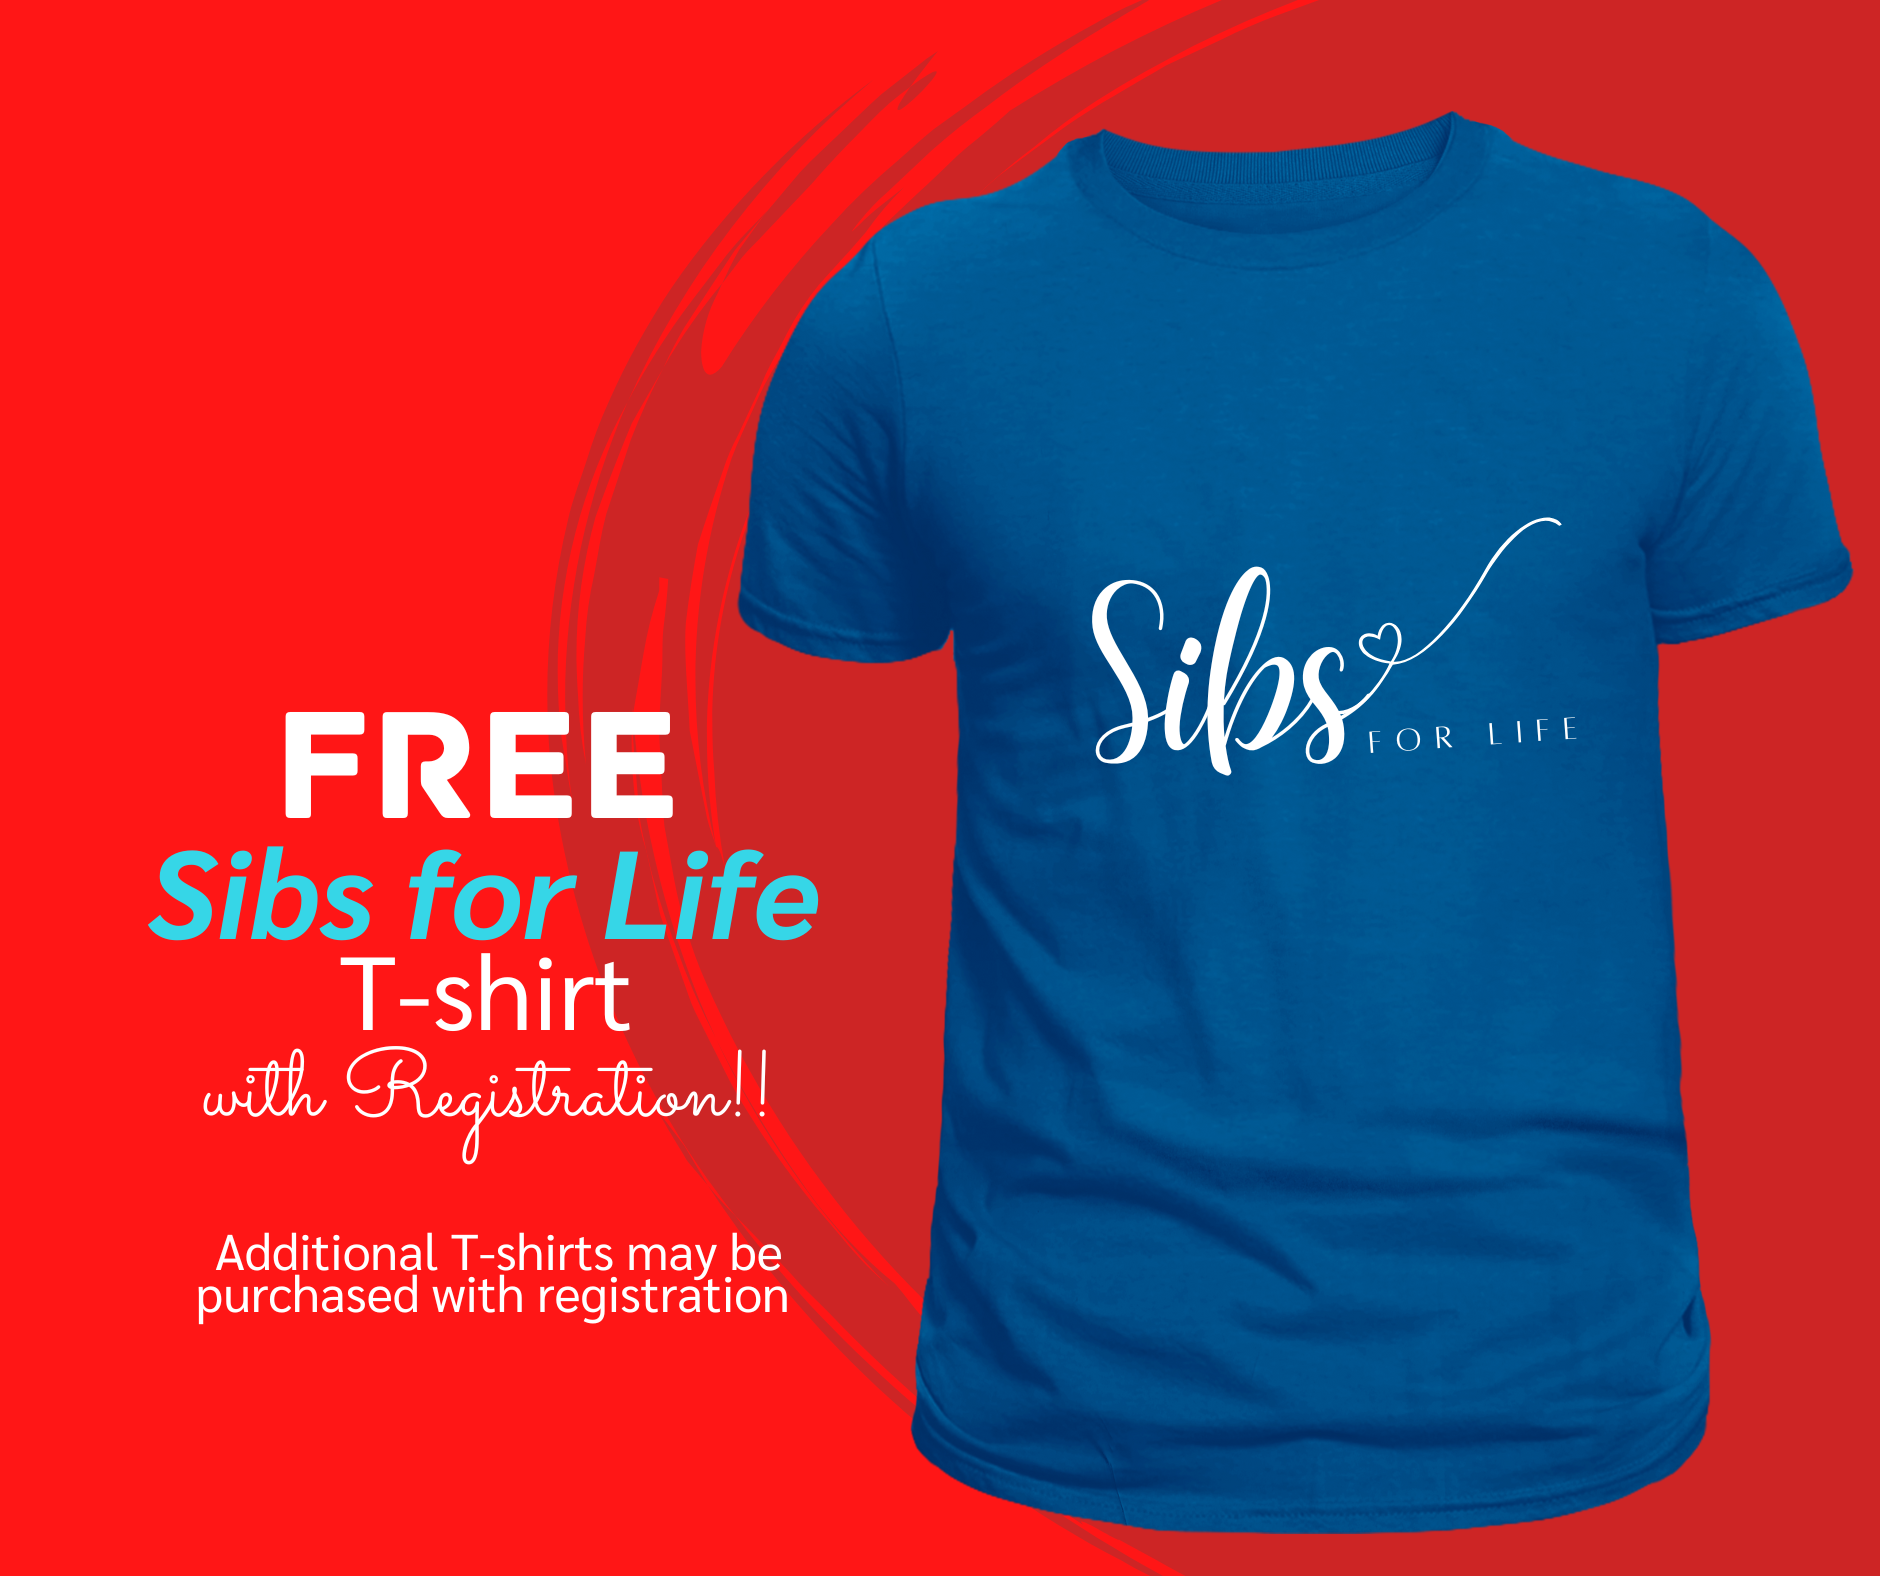 Sibs for Life T-shirts